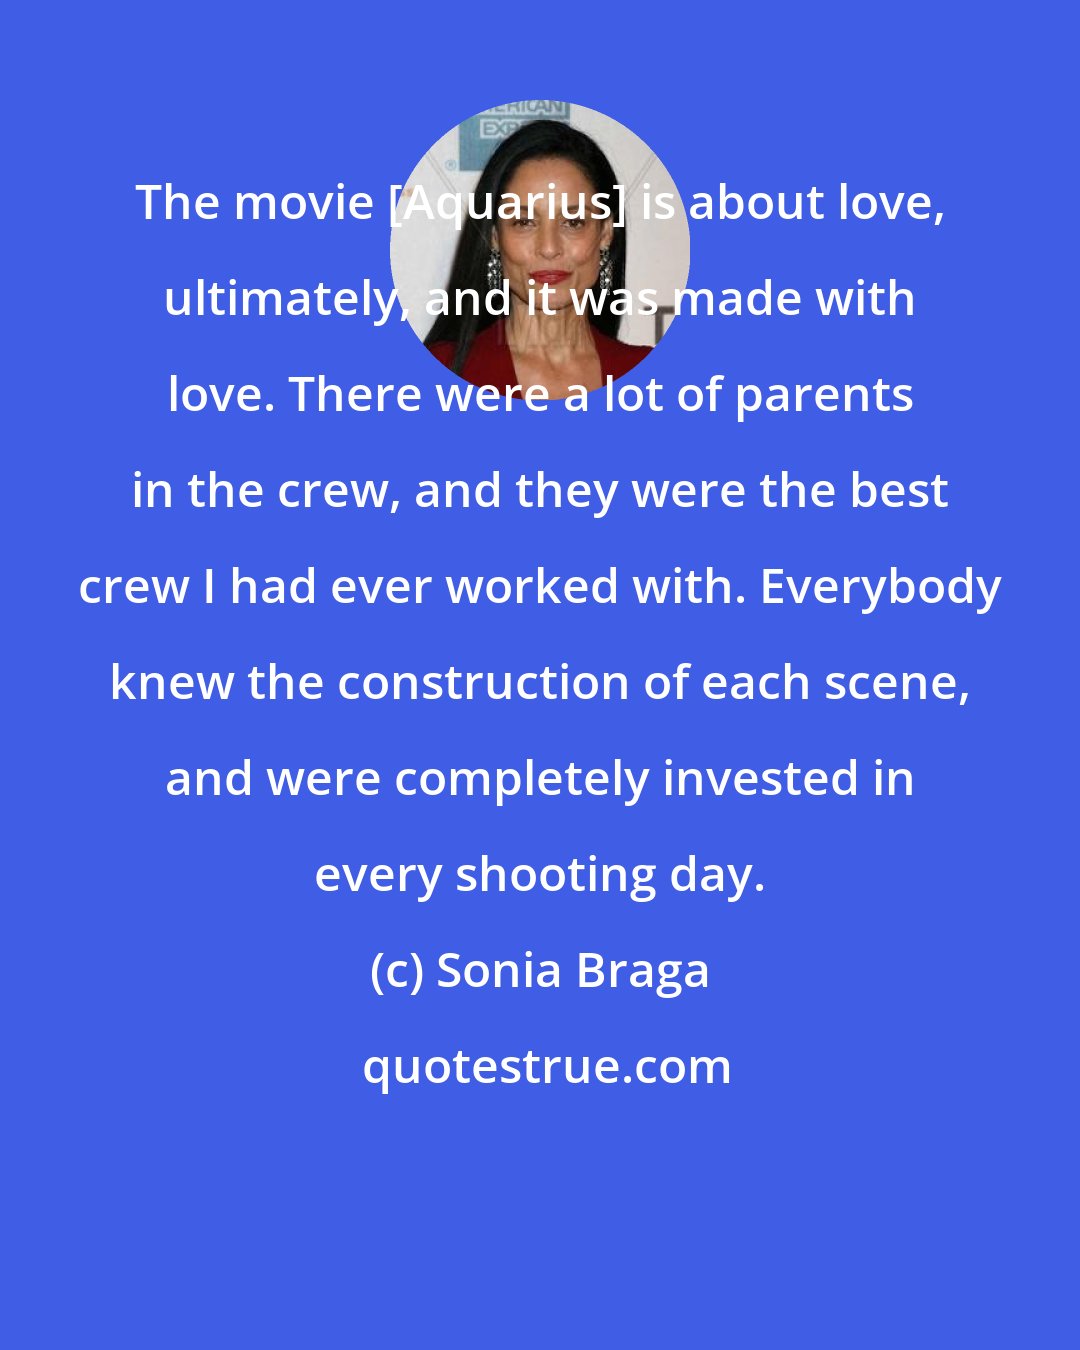 Sonia Braga: The movie [Aquarius] is about love, ultimately, and it was made with love. There were a lot of parents in the crew, and they were the best crew I had ever worked with. Everybody knew the construction of each scene, and were completely invested in every shooting day.